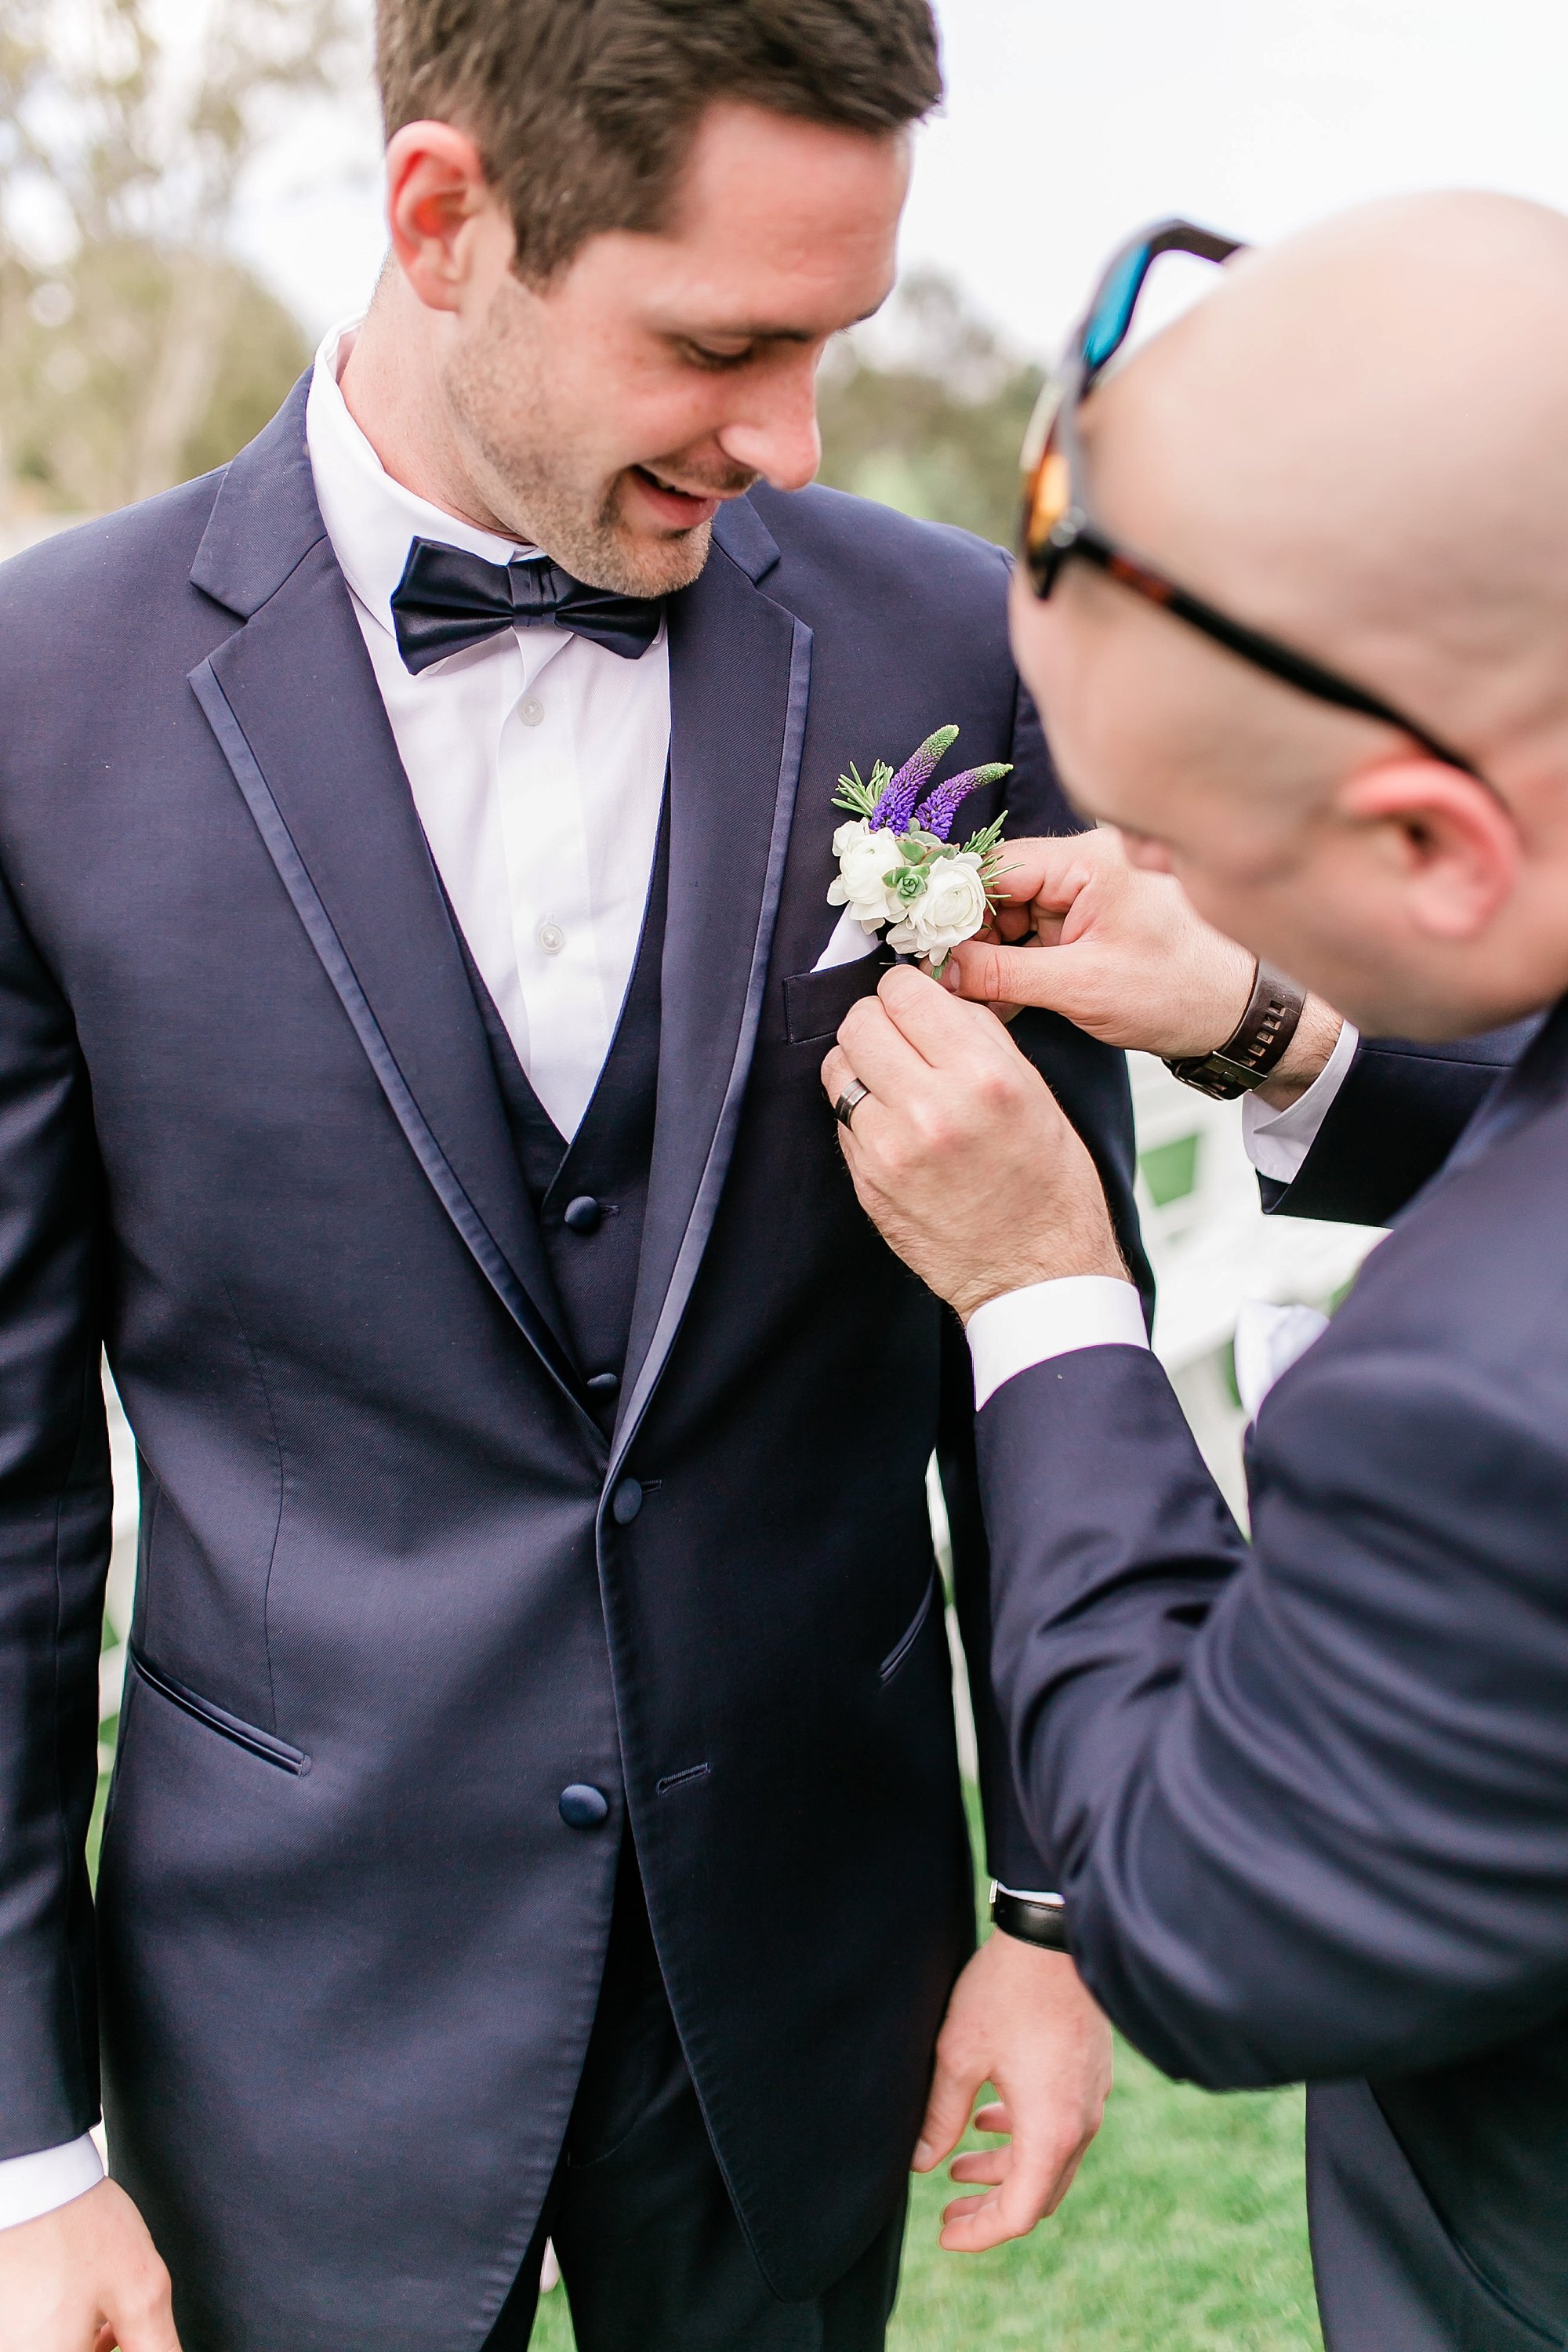  best man helping groom with boutonniere  